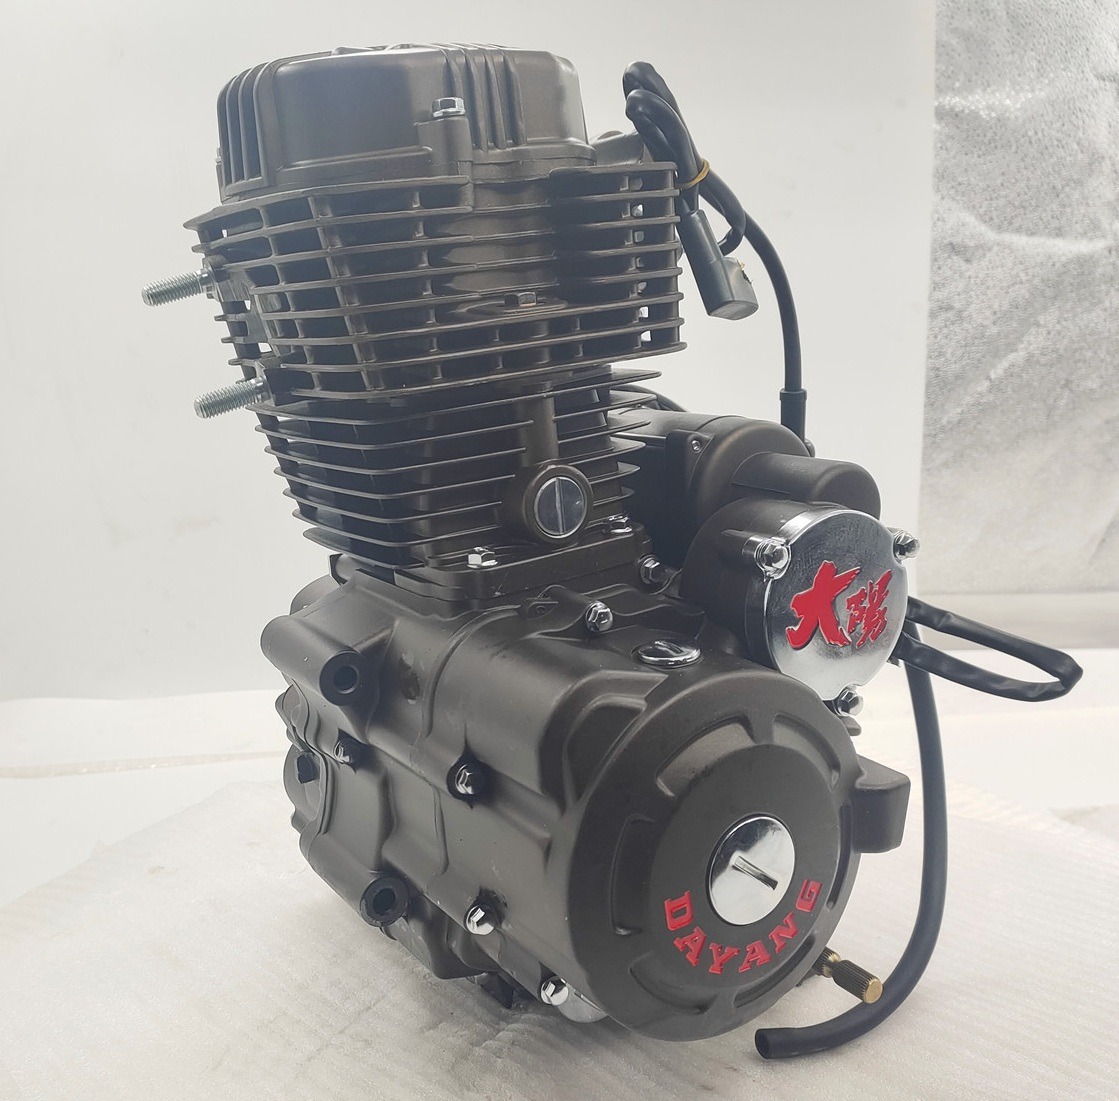 DAYANG CG200 air-cooled LIFAN  Chinese three wheels Motorcycle Engines tricycle engines assembly one cylinder fout stroke engine